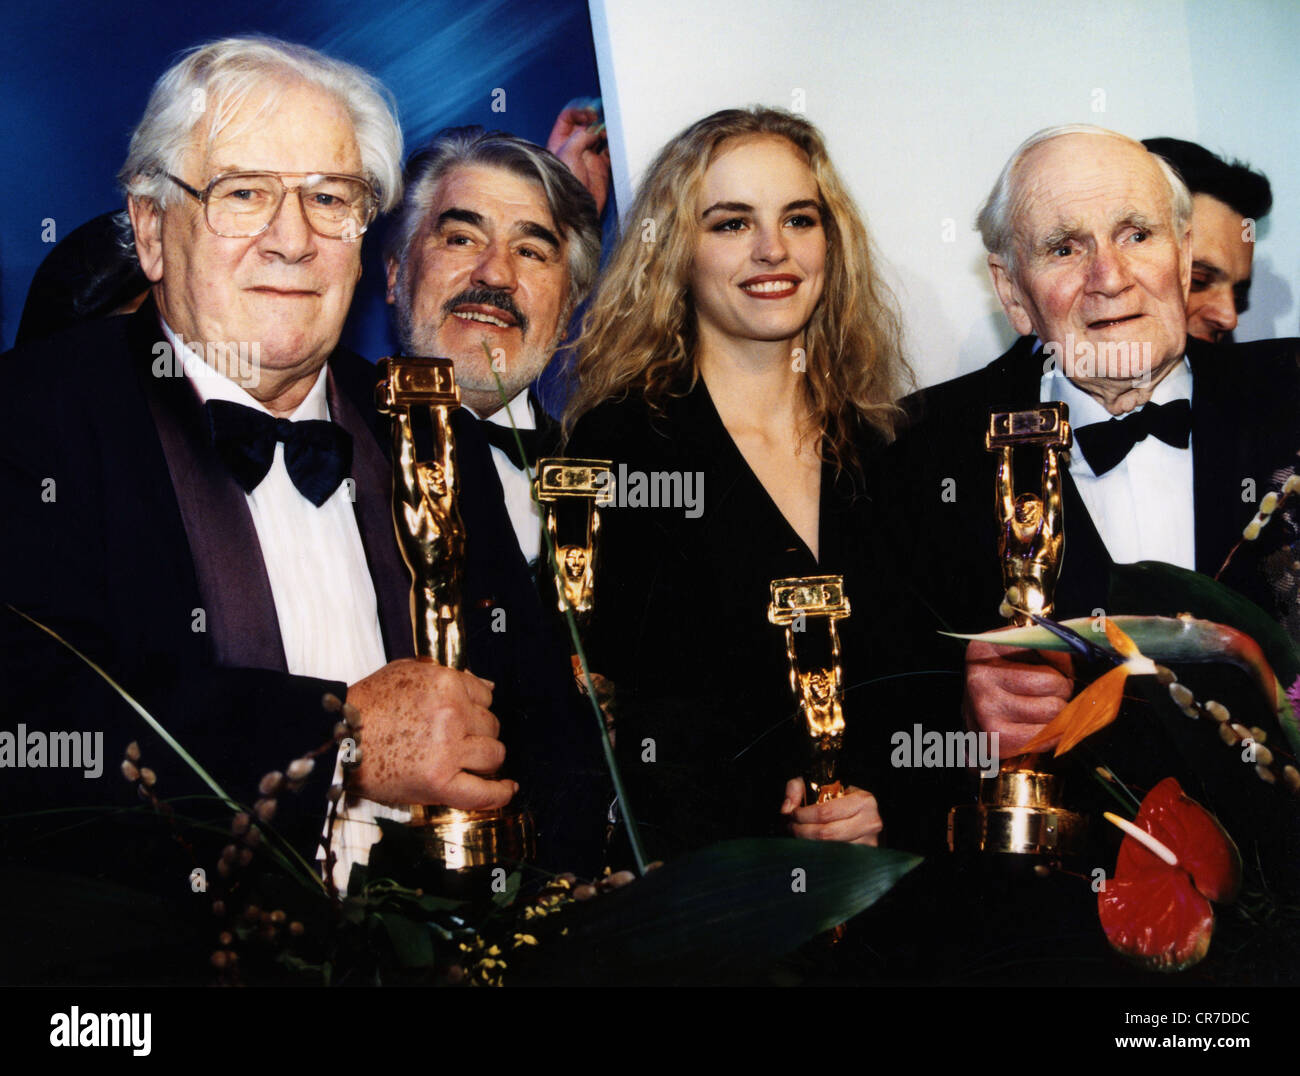 Ustinov, Peter, 16.4.1921 - 28.3.2004, British actor, director and author/writer, group picture, with German actor Mario Adorf, German actress Nina Hoss and British actor Desmond Wilkinson Llewelyn, during the 'German Video Awards' ceremony, Munich, February 1997, Stock Photo